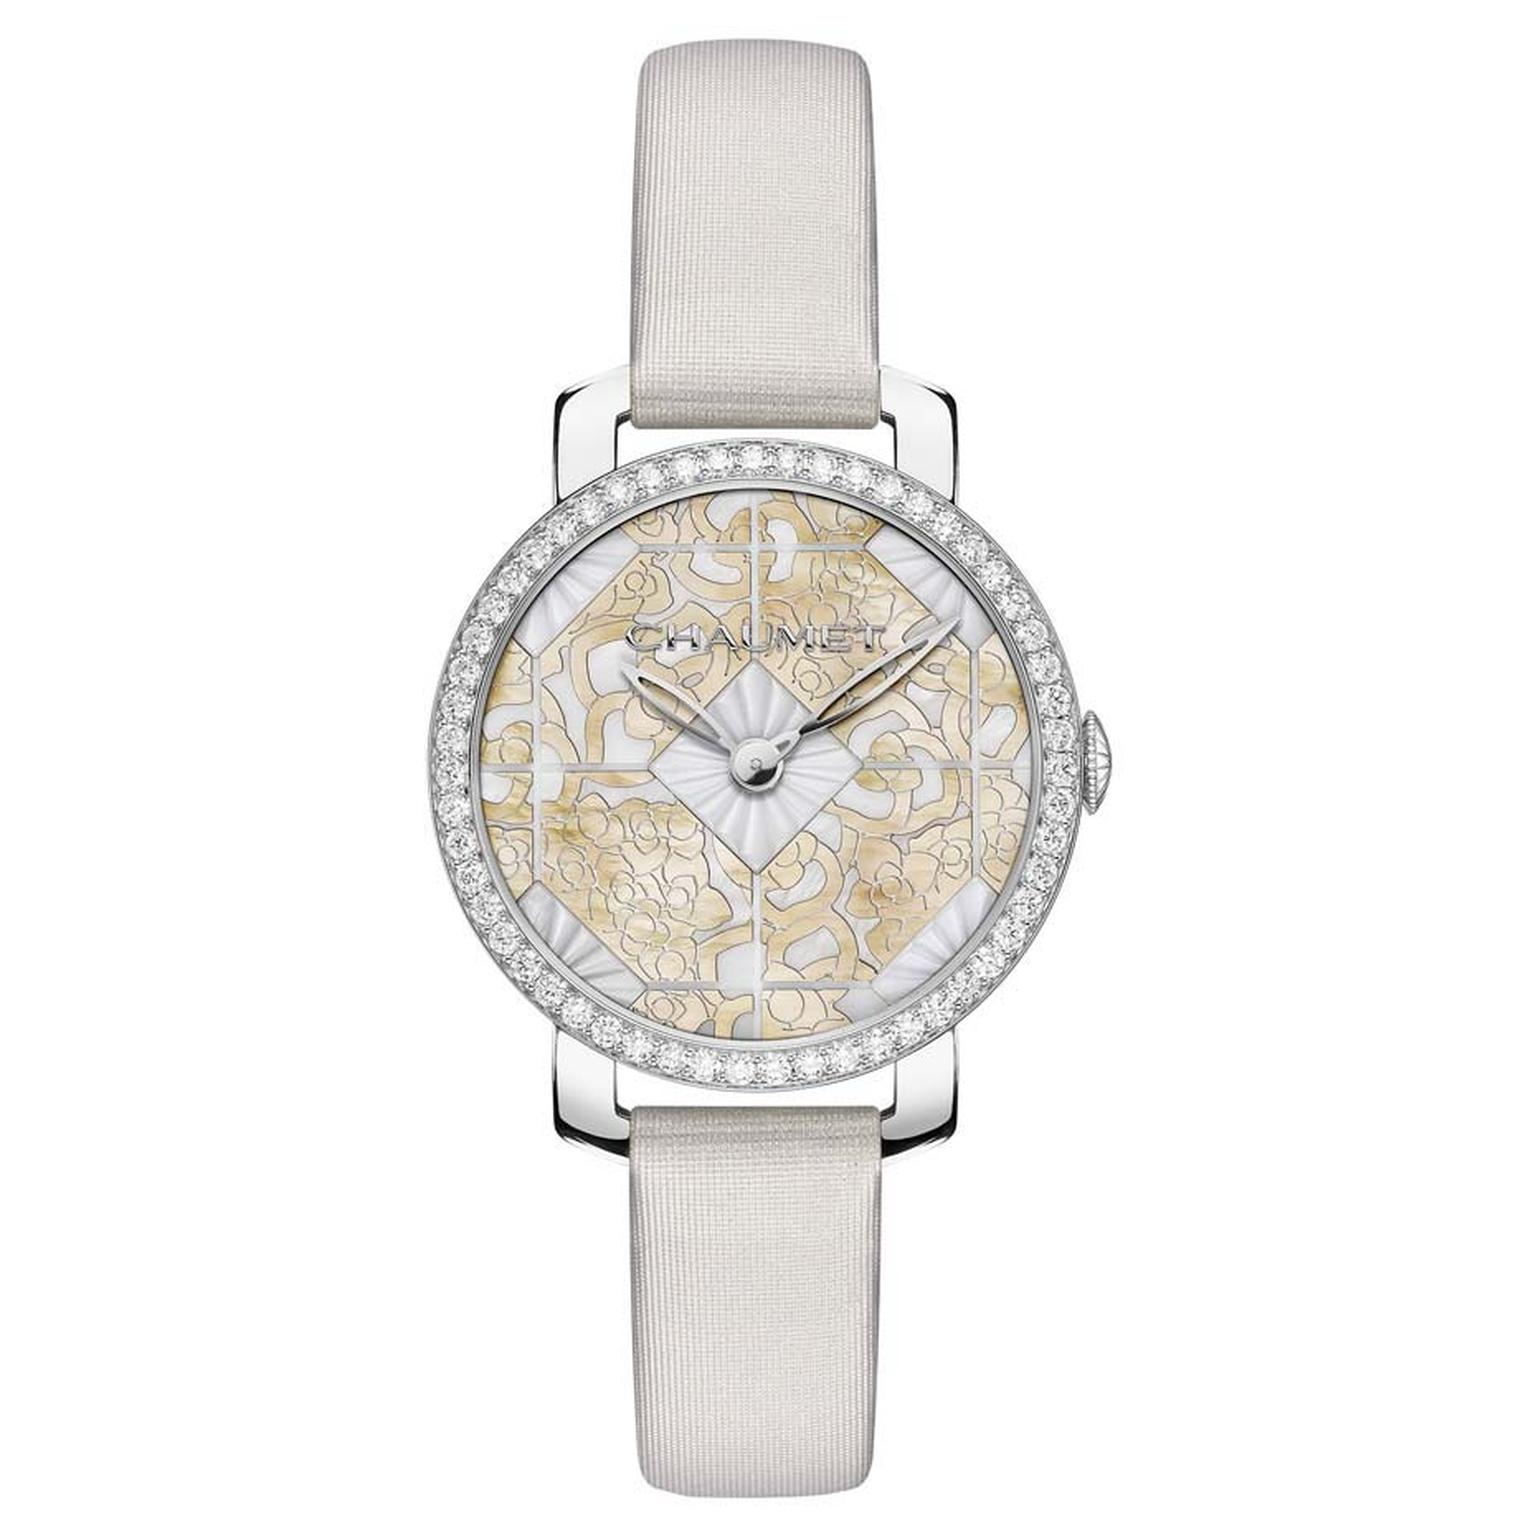 Chaumet Hortensia ladies' watch with a 31mm geometric dial has been delicately engraved in gold mother-of-pearl and set into the white mother-of-pearl hexagonal shapes in the centre.